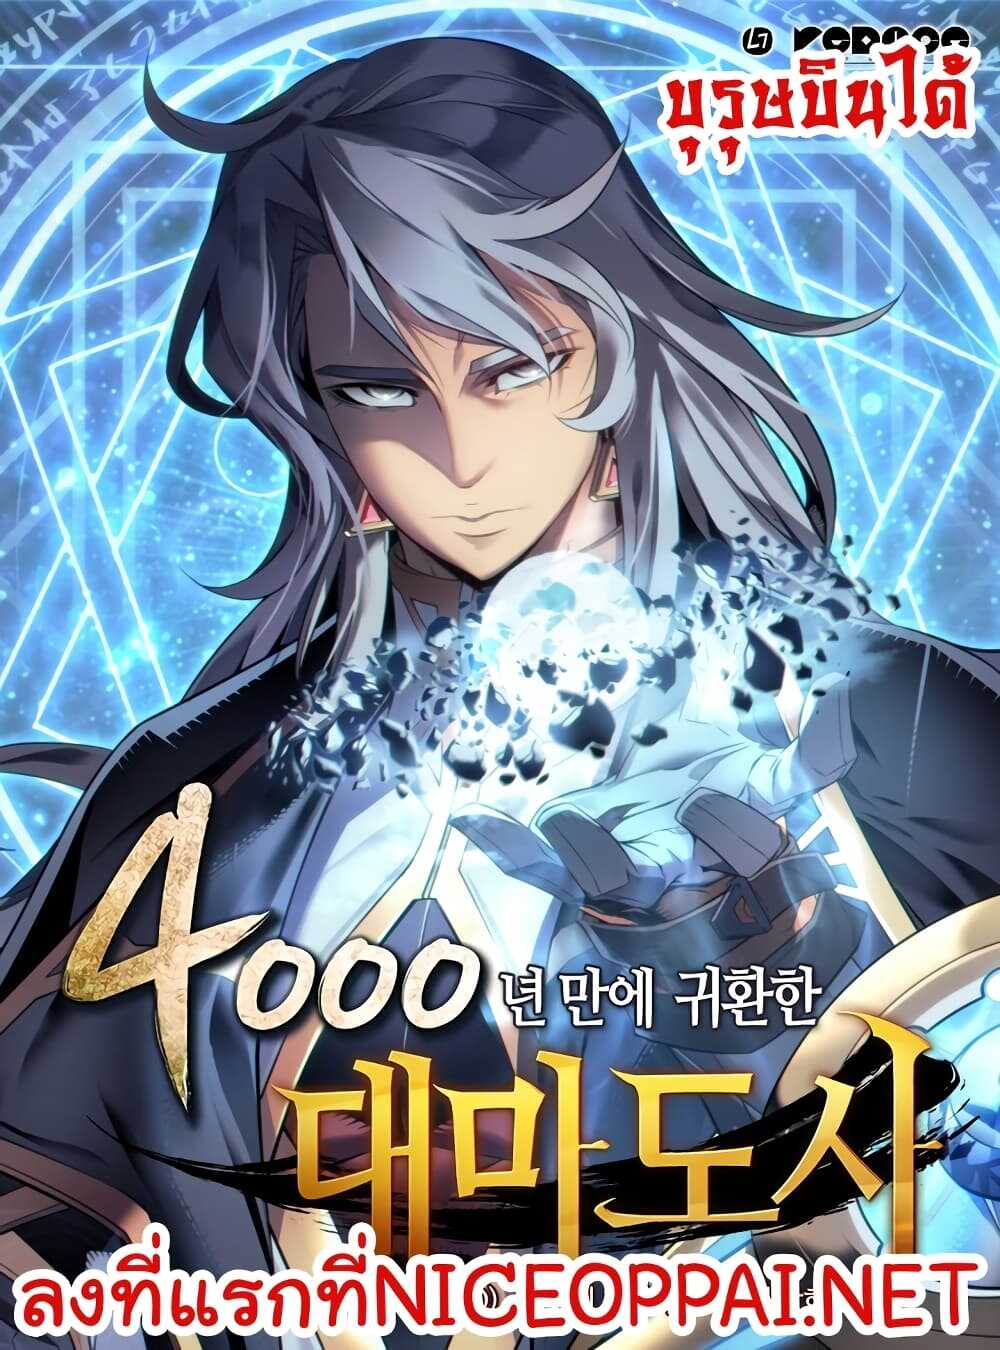 The Great Mage Returns After 4000 Years 20 (1)